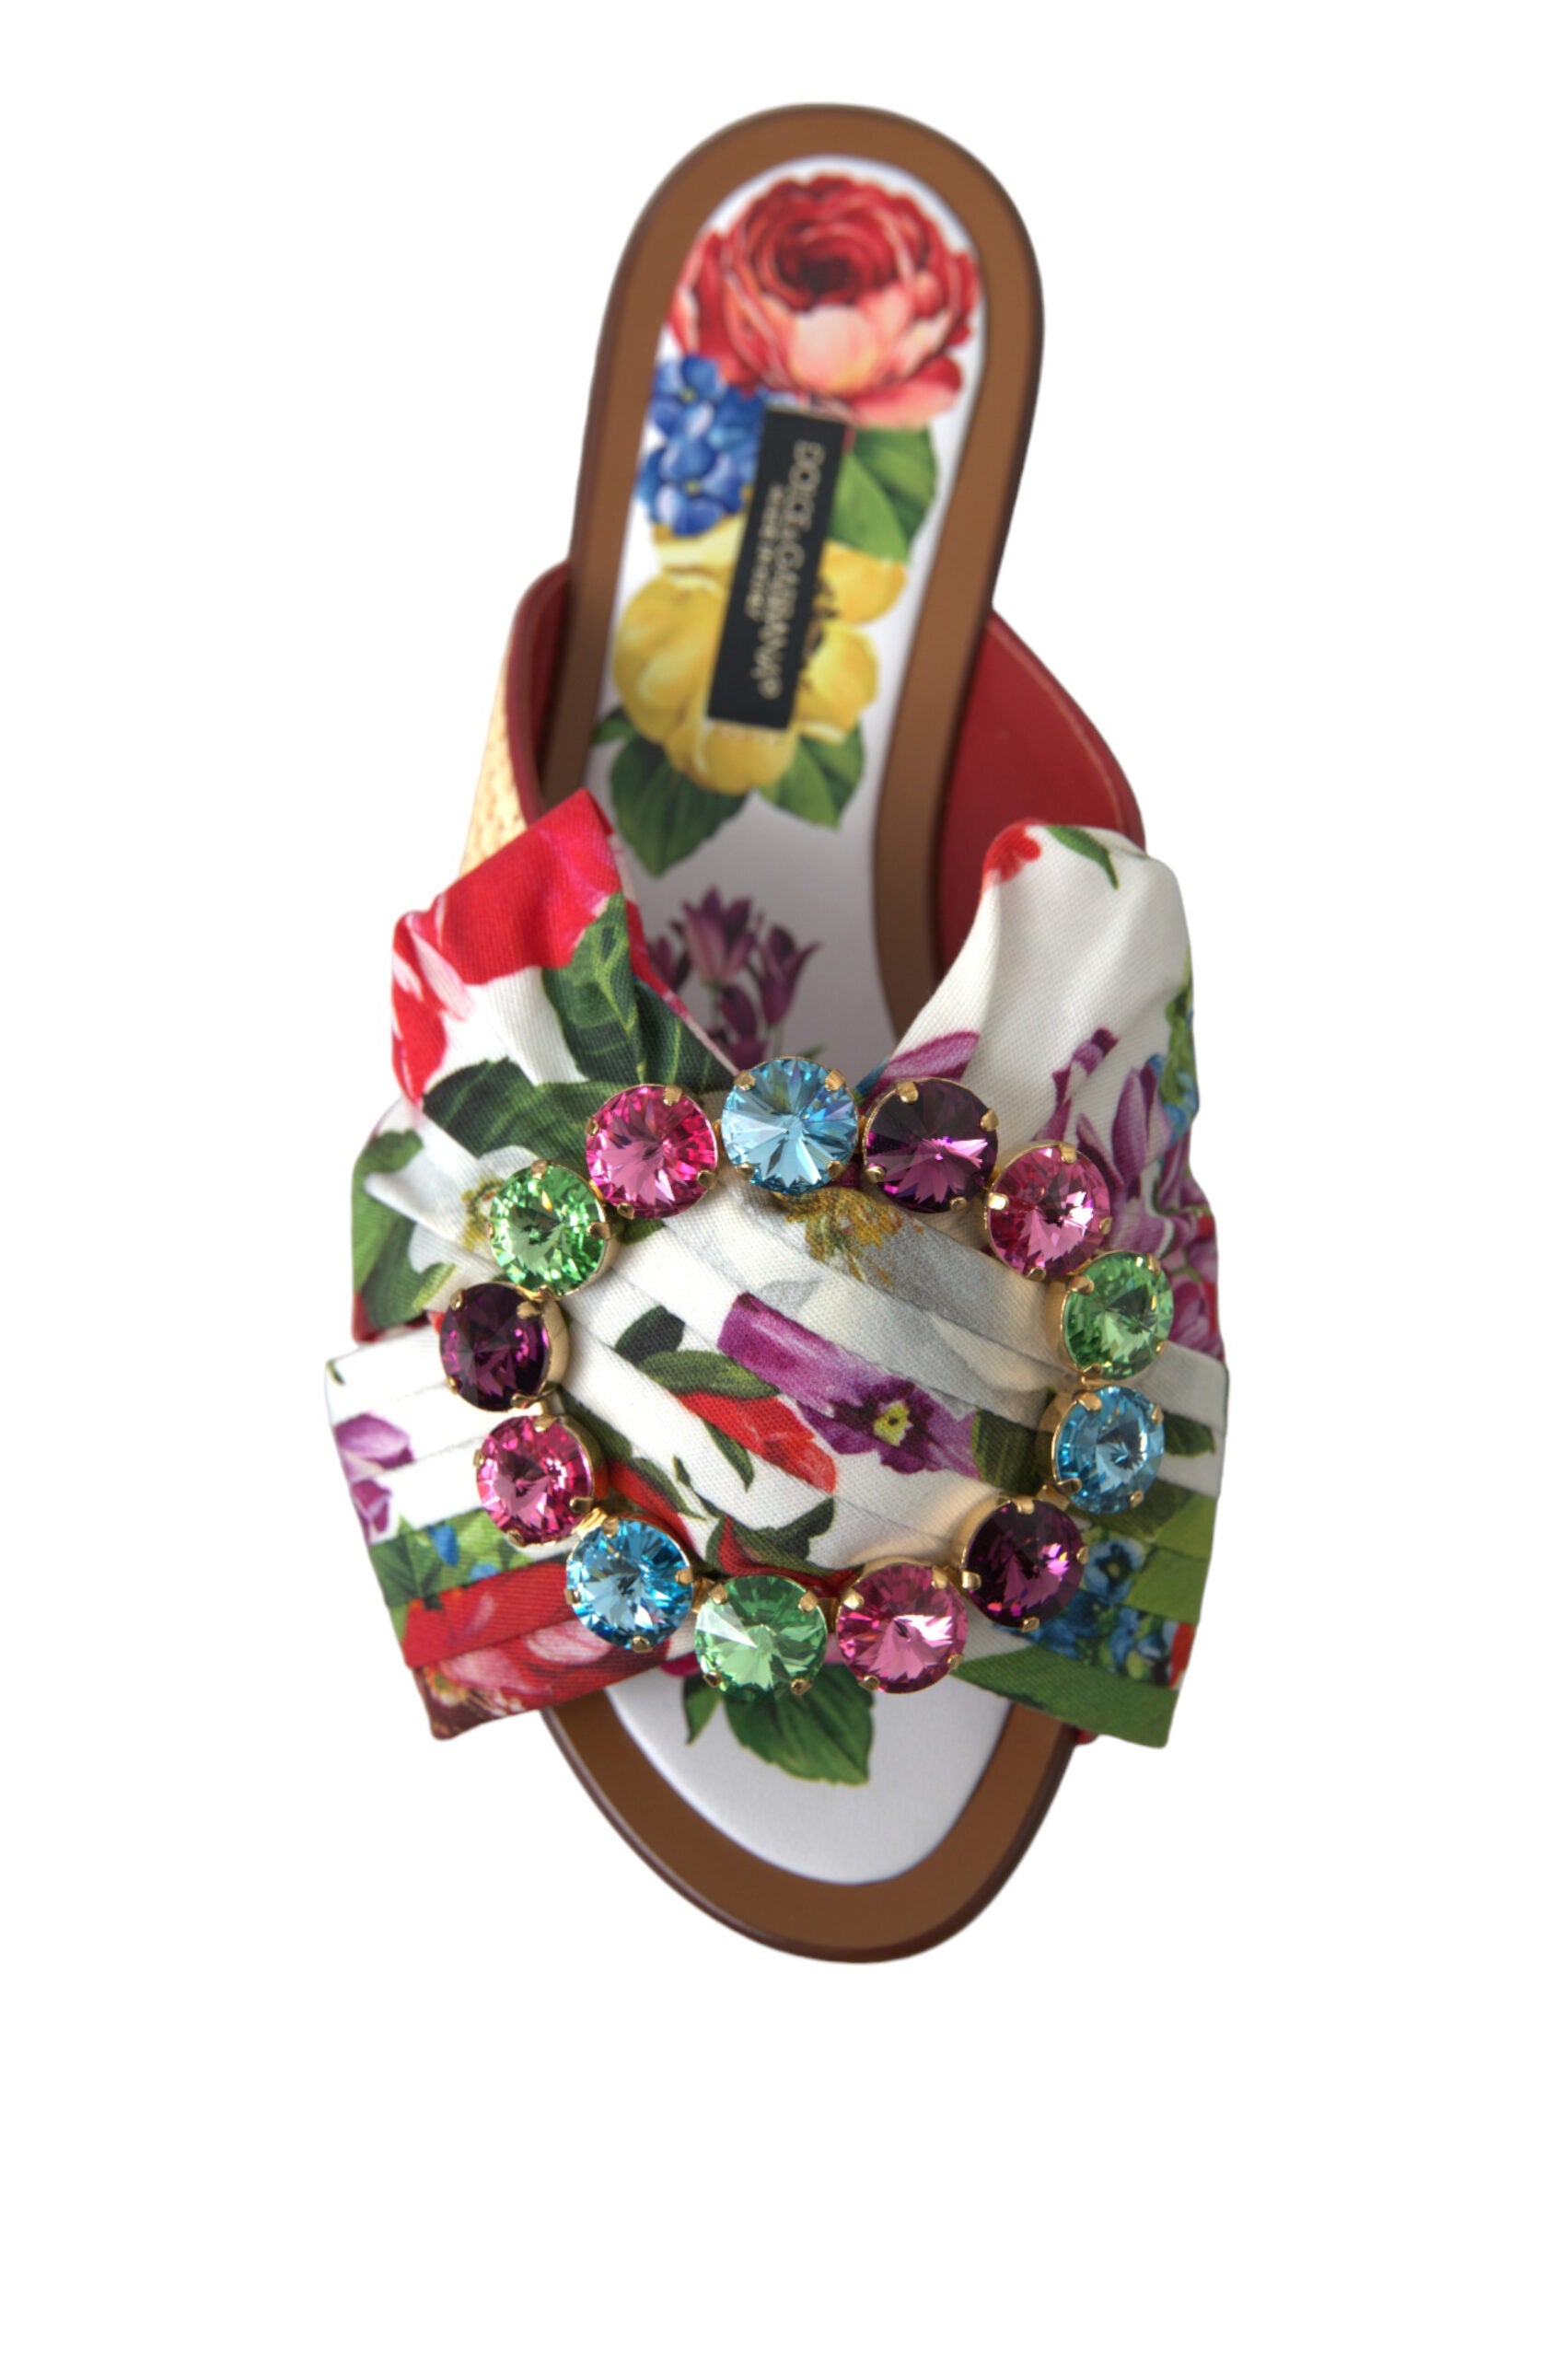 Dolce & Gabbana Multicolor Floral Flats Crystal Sandals Shoes GENUINE AUTHENTIC BRAND LLC